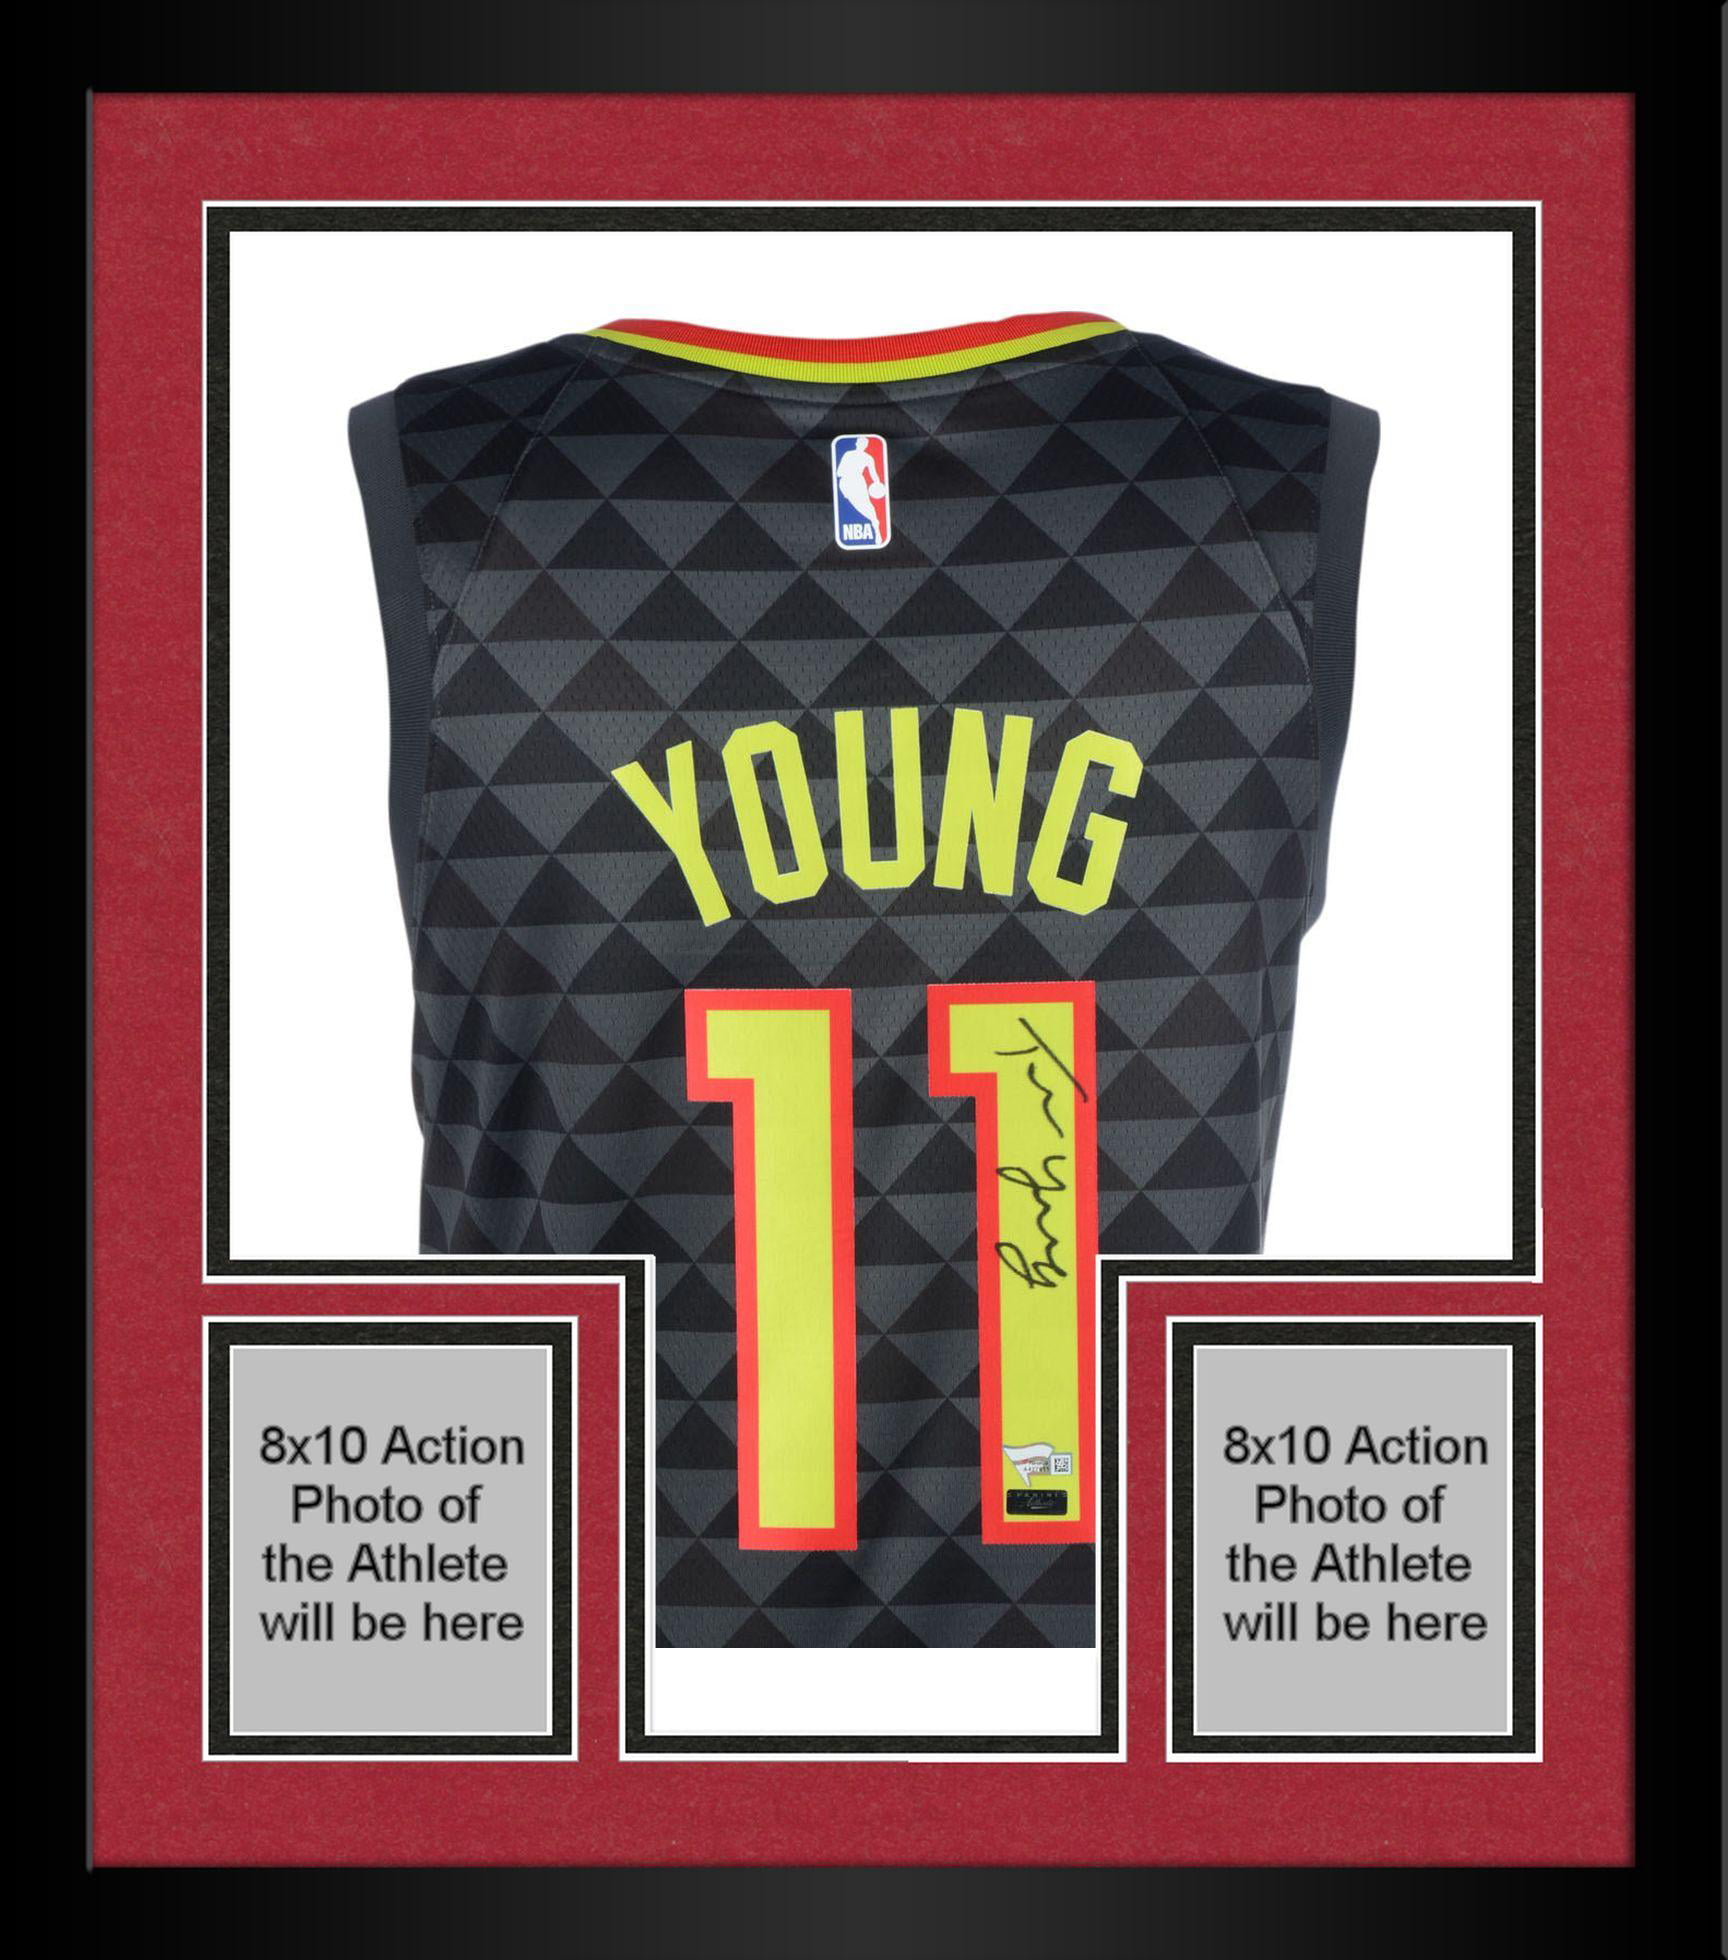 trae young authentic jersey